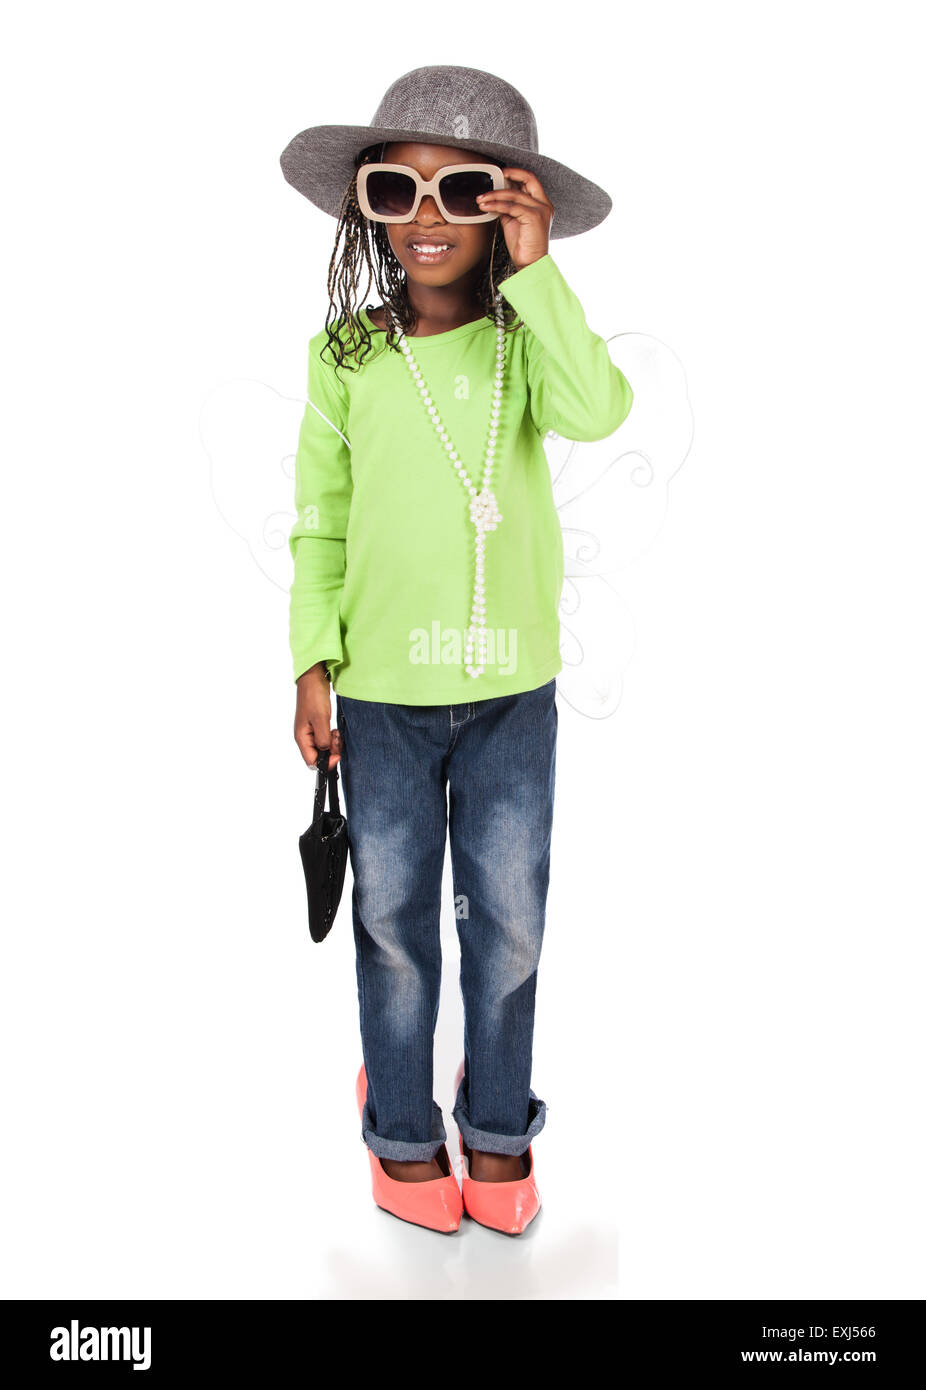 Adorable small african child with braids wearing a bright green shirt and blue jeans. The girl is playing dress up with a hat su Stock Photo